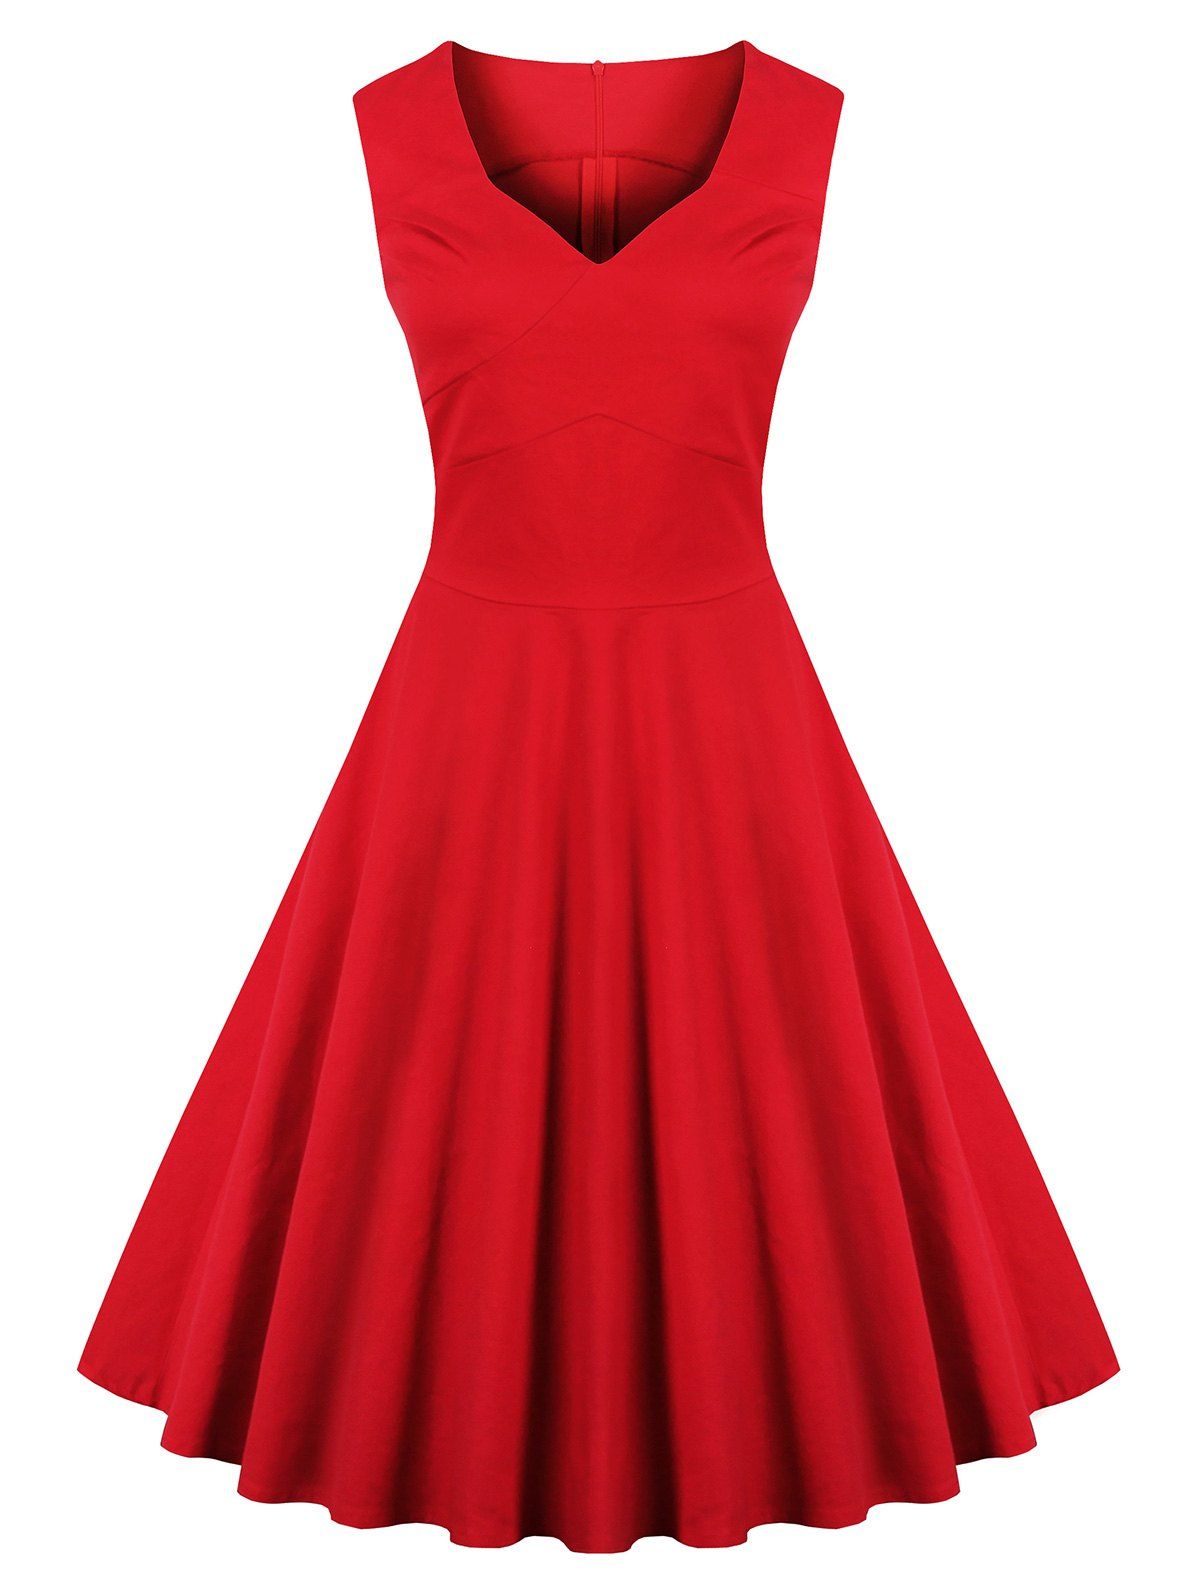 [41% OFF] 2020 Vintage Sweetheart Collar Bridesmaid Flare Dress In RED ...